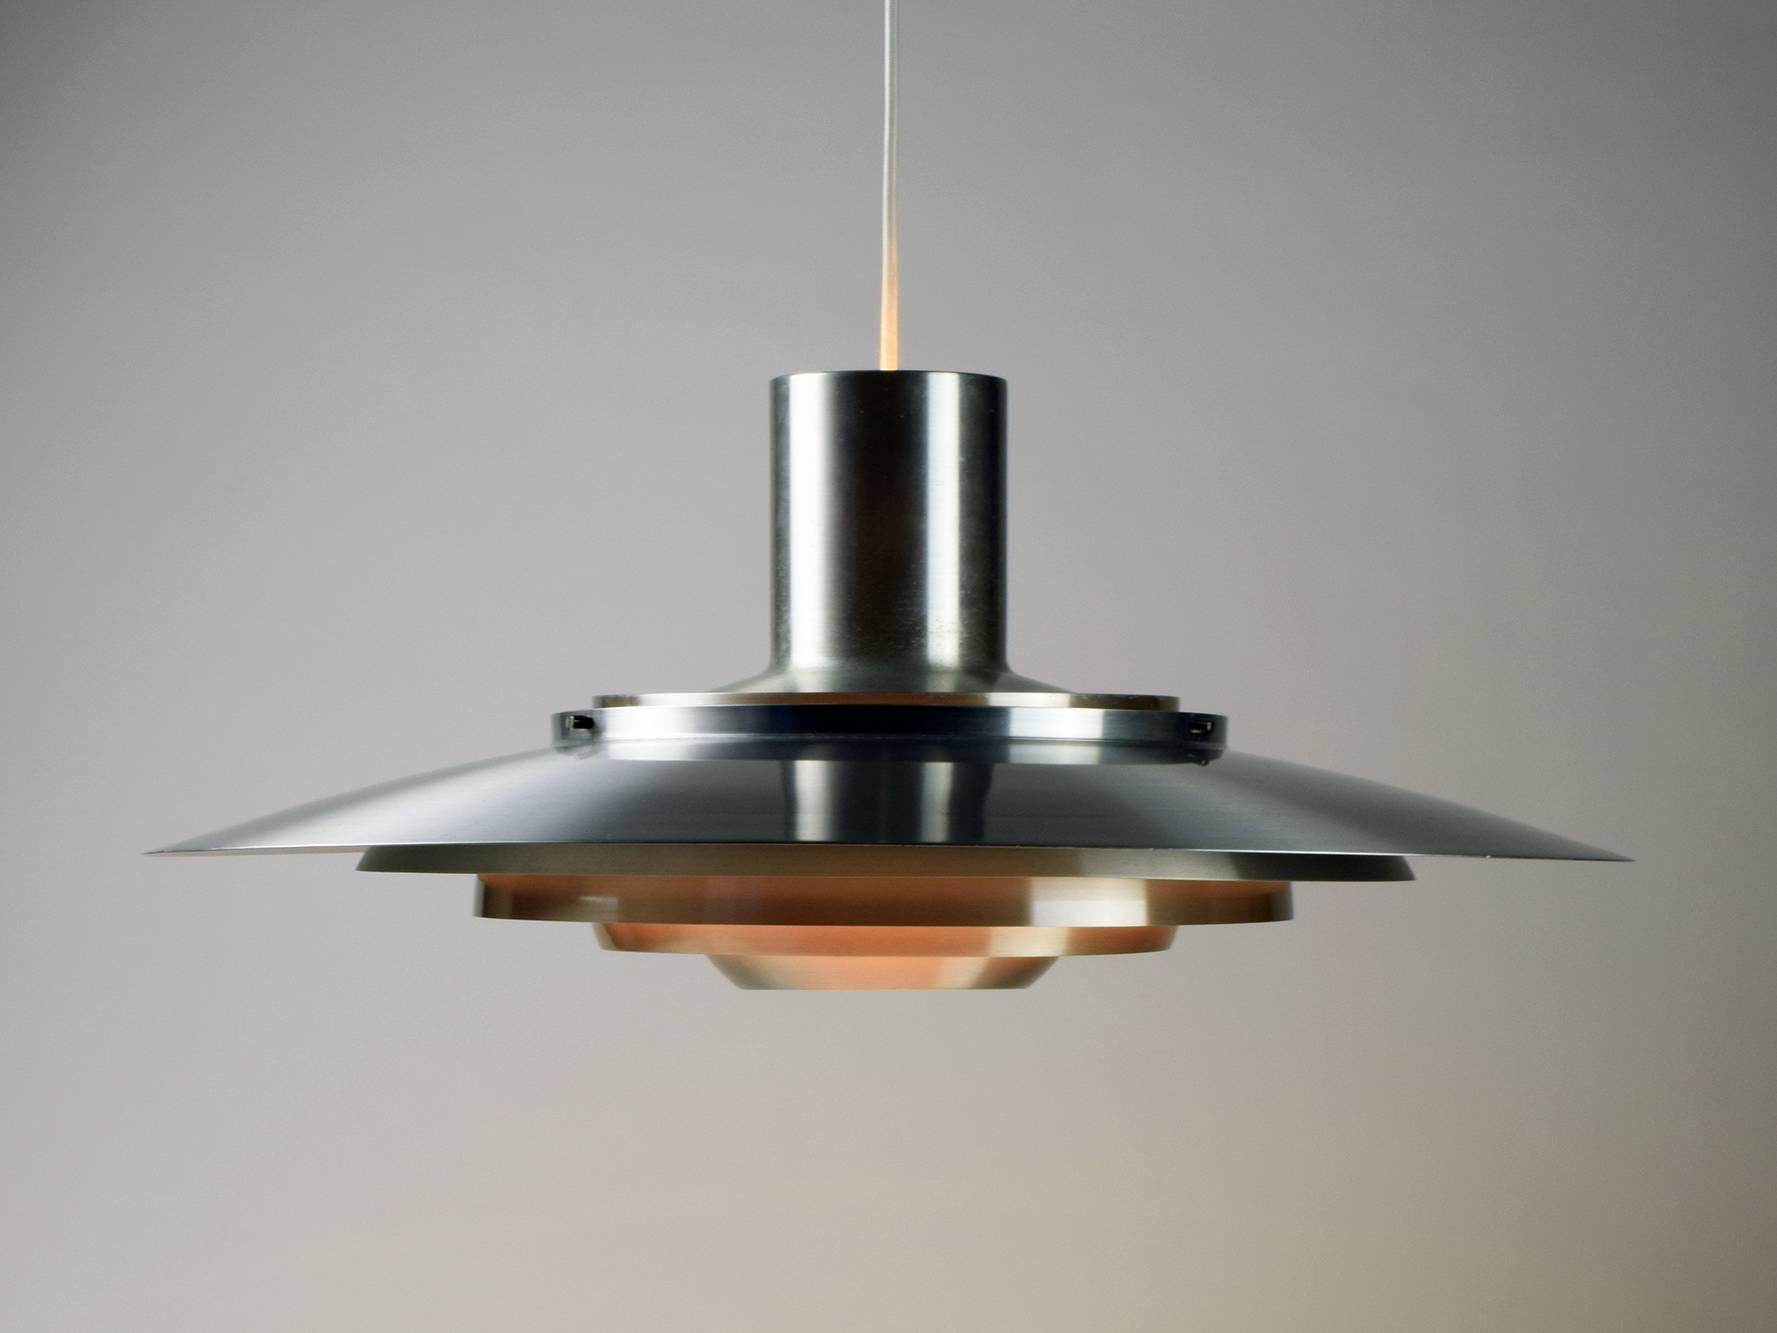 Jørgen Kastholm & Preben Fabricius.
Nordisk Solar, Denmark (manufacturer).
Extra large pendant ceiling lamp, 1960s.

Aluminium. Good original condition with some surface patina.
Fully re-wired, compete with white ceiling cap and spare light